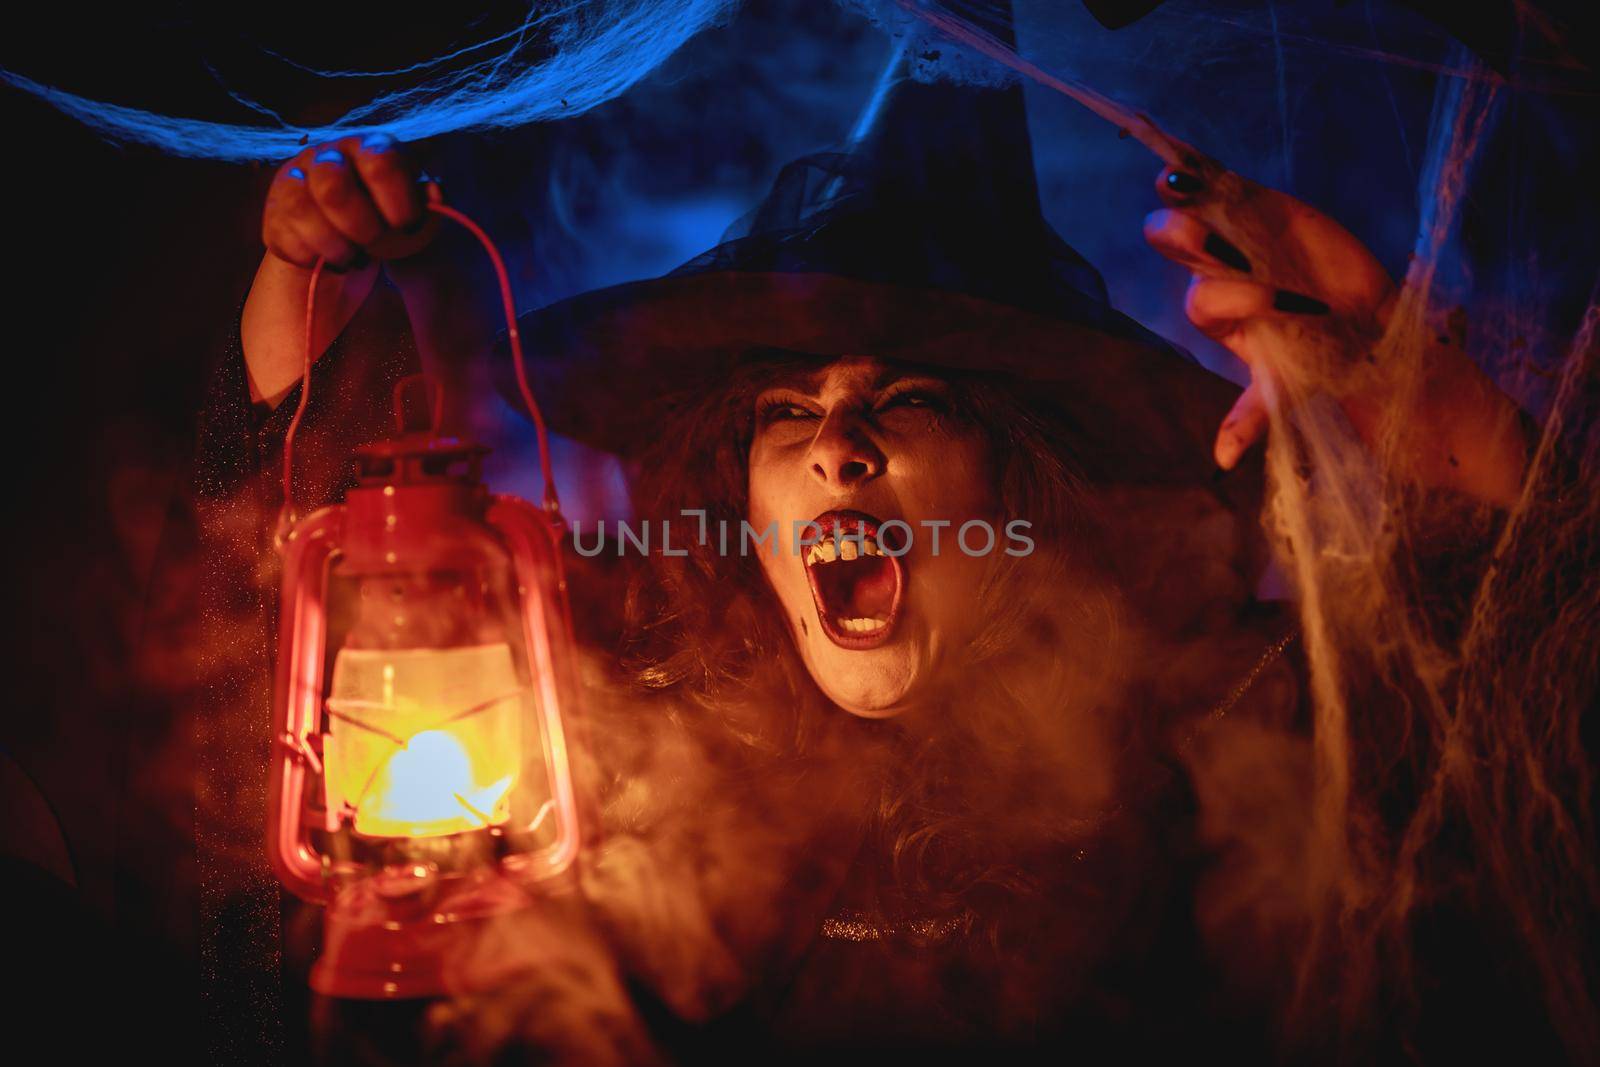 Witch With Lighted Lantern In Magic Fog by MilanMarkovic78